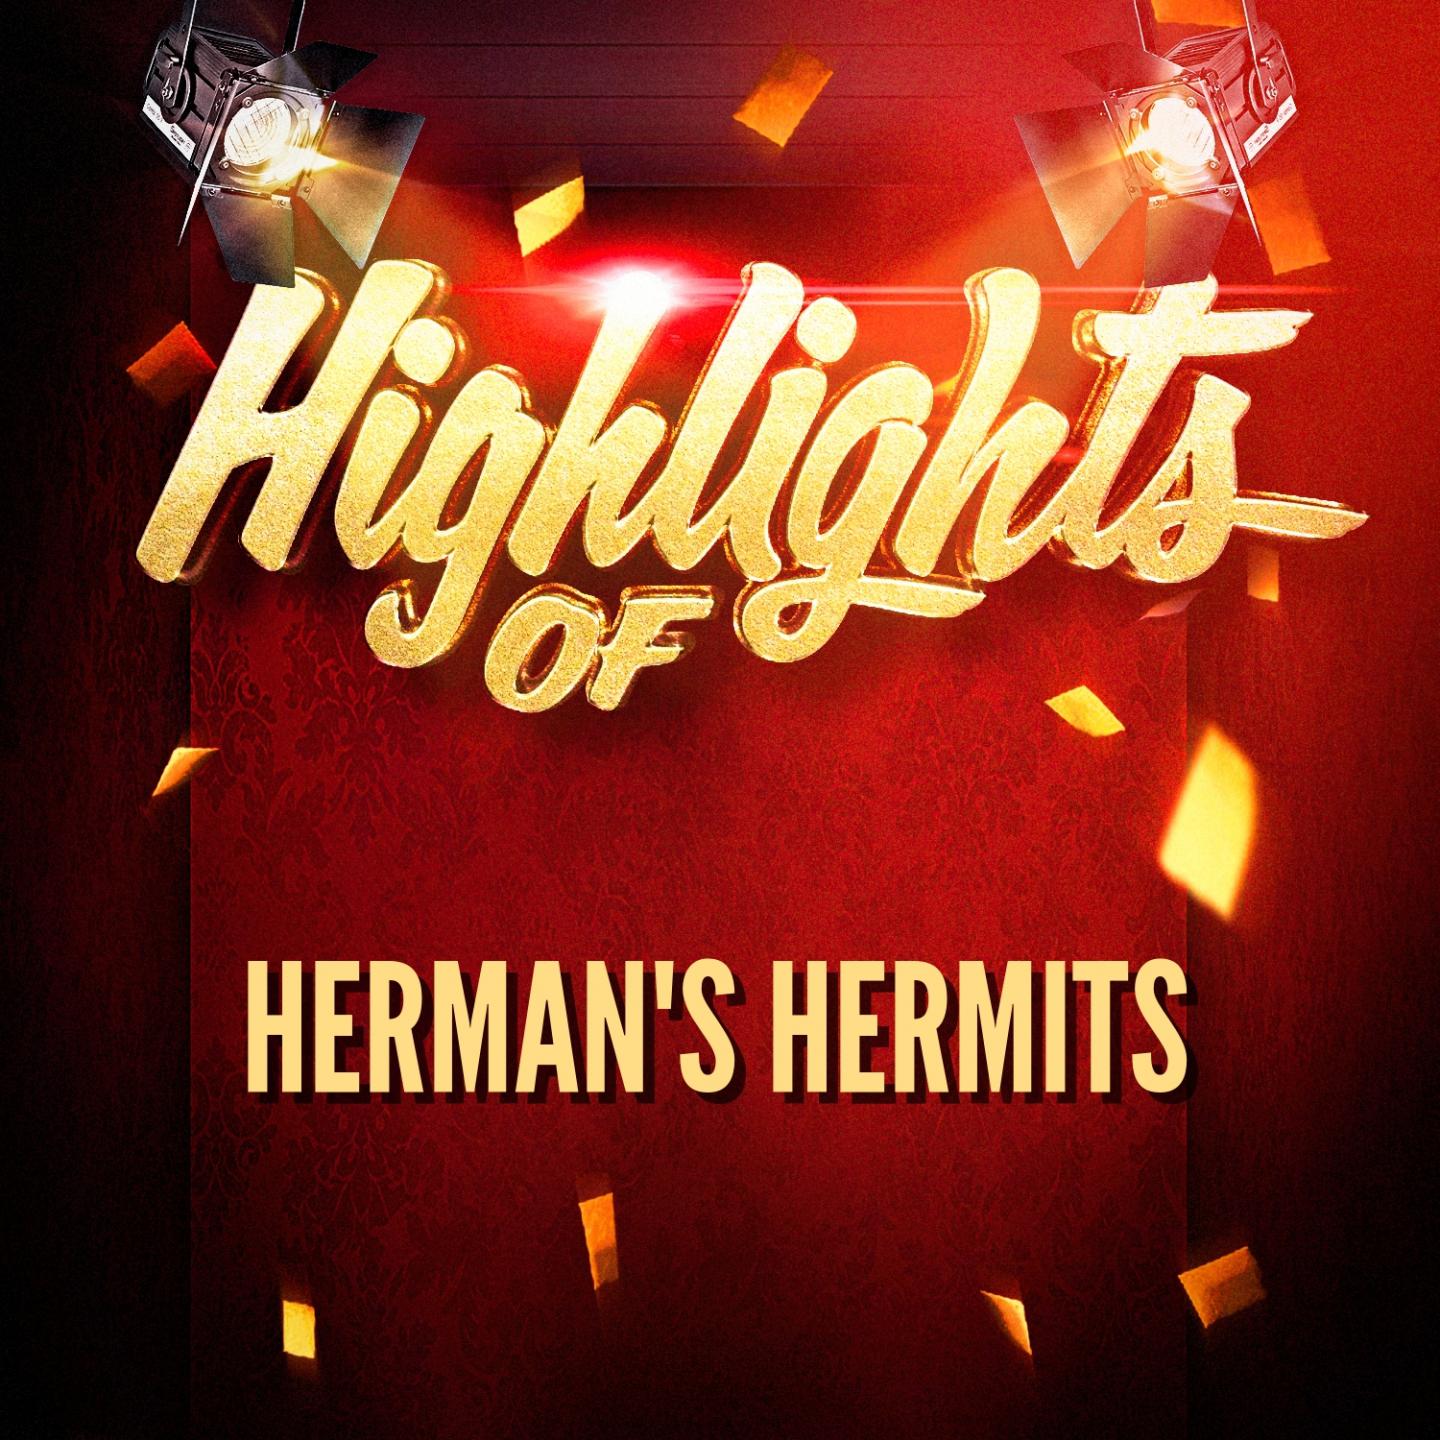 Highlights of Herman's Hermits